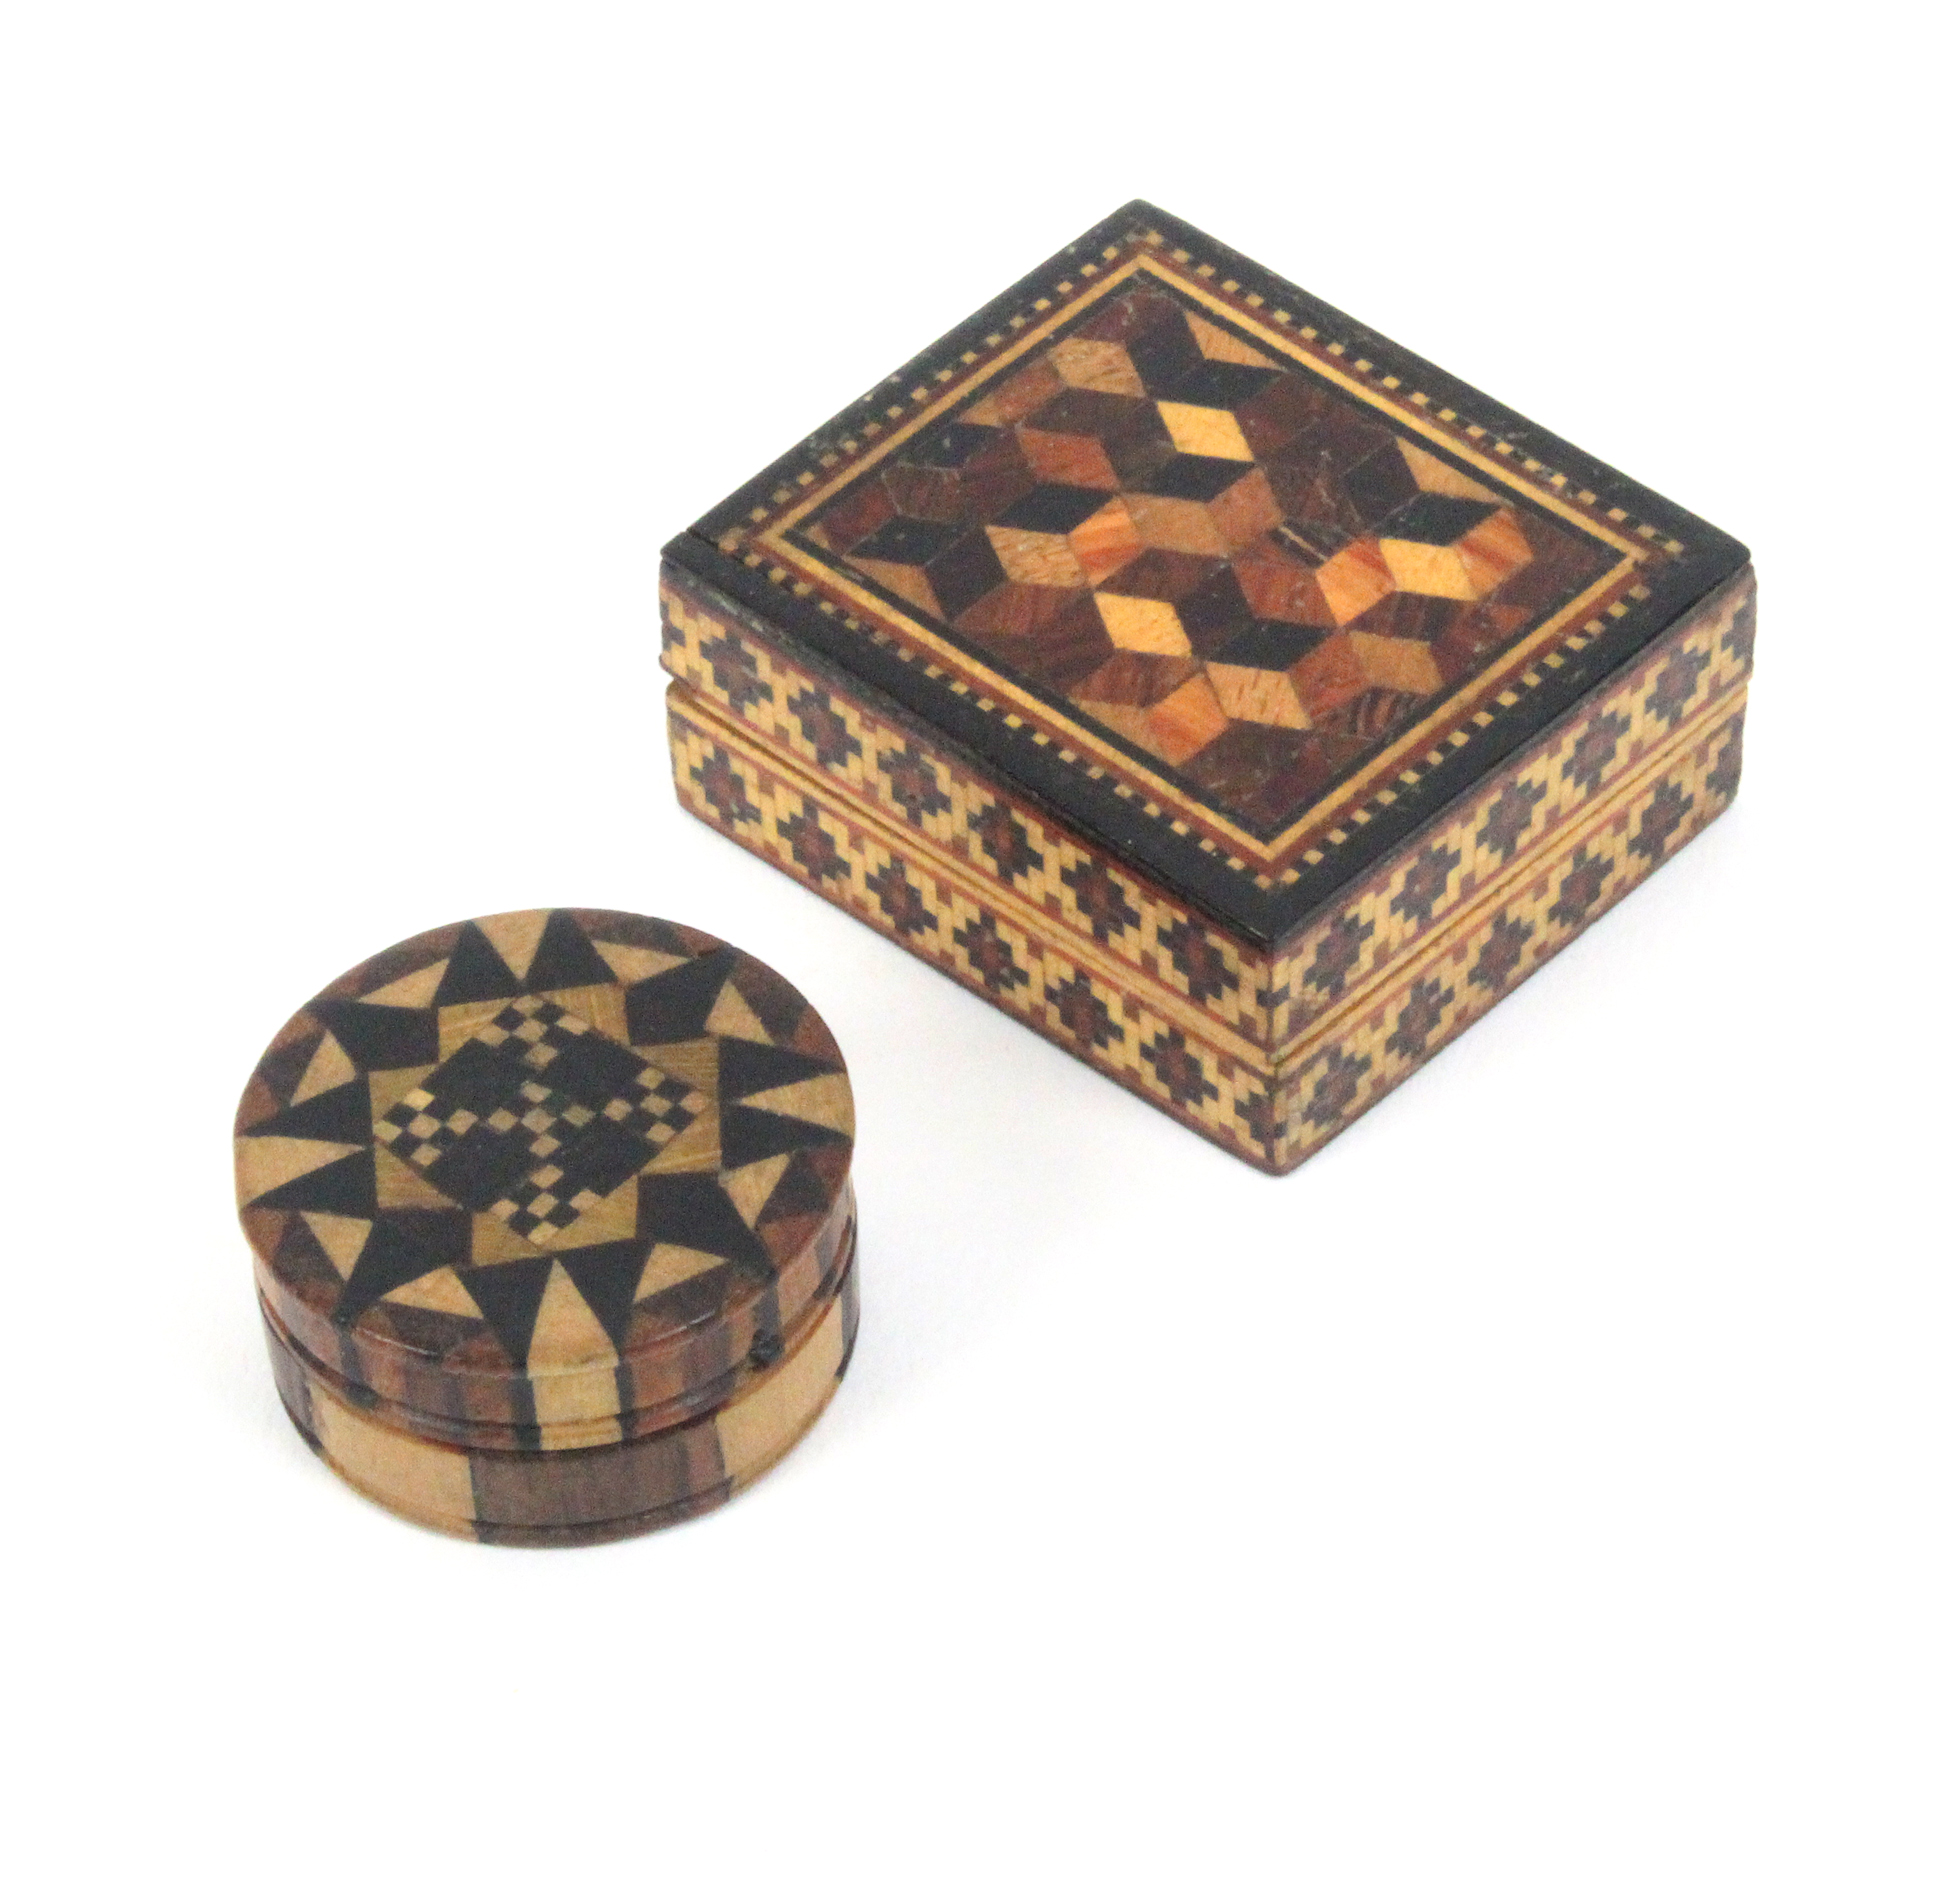 Tunbridge ware - two pieces comprising a small rectangular box with cube lid and mosaic sides, 4 x